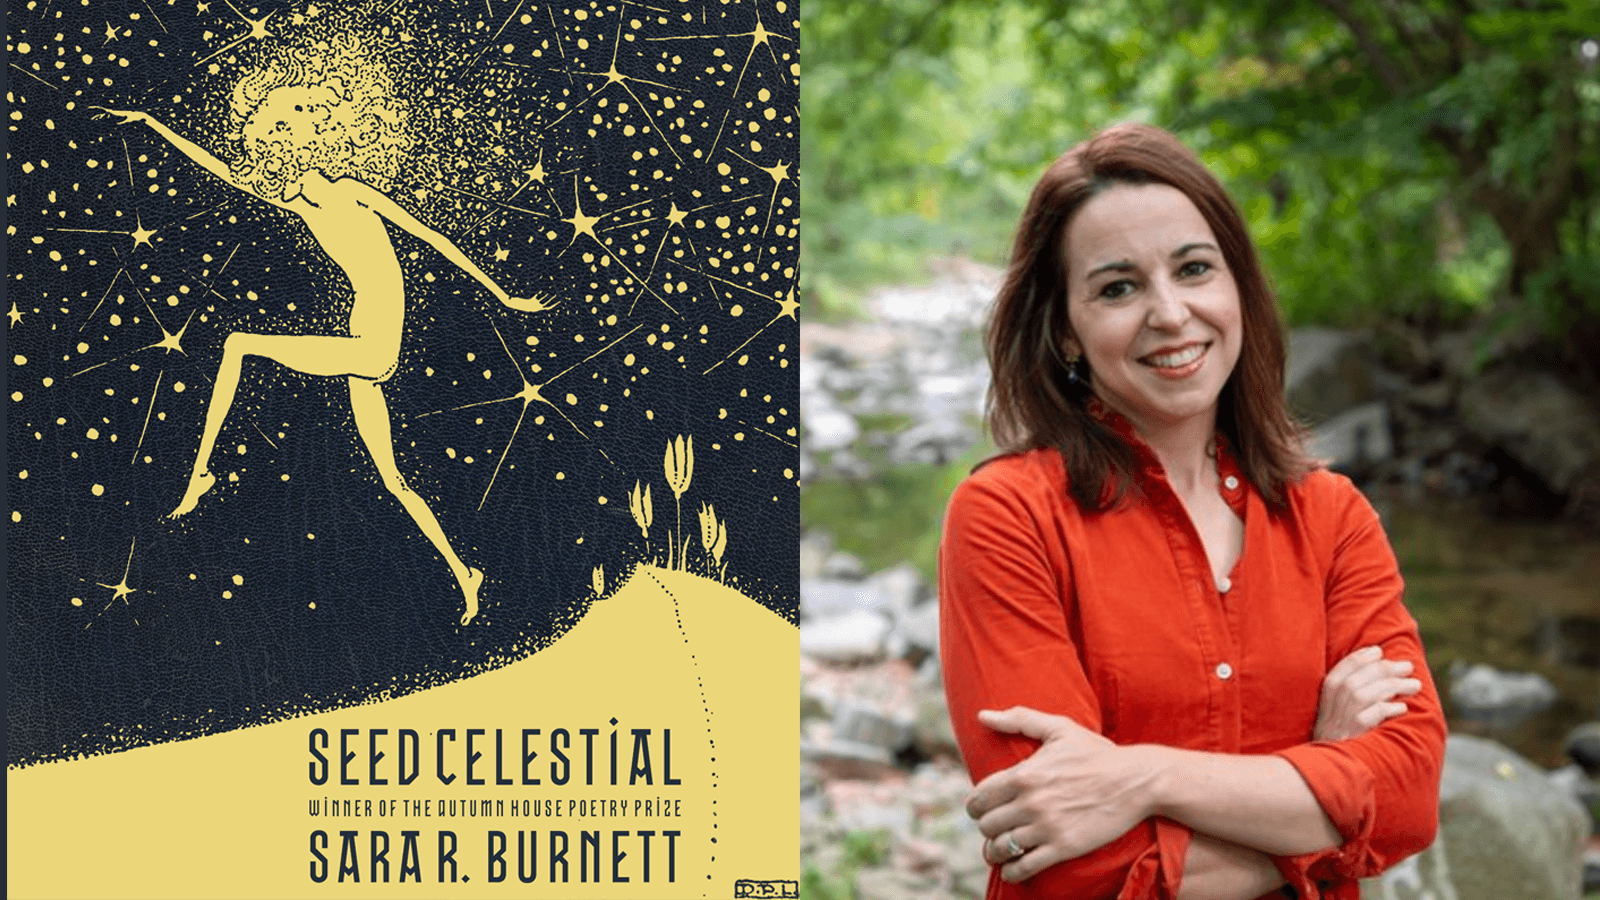 Book Cover Art for Seed Celestial, illustration of a figure dancing among stars. Also headshot of Sara Burnett smiling in red shirt.